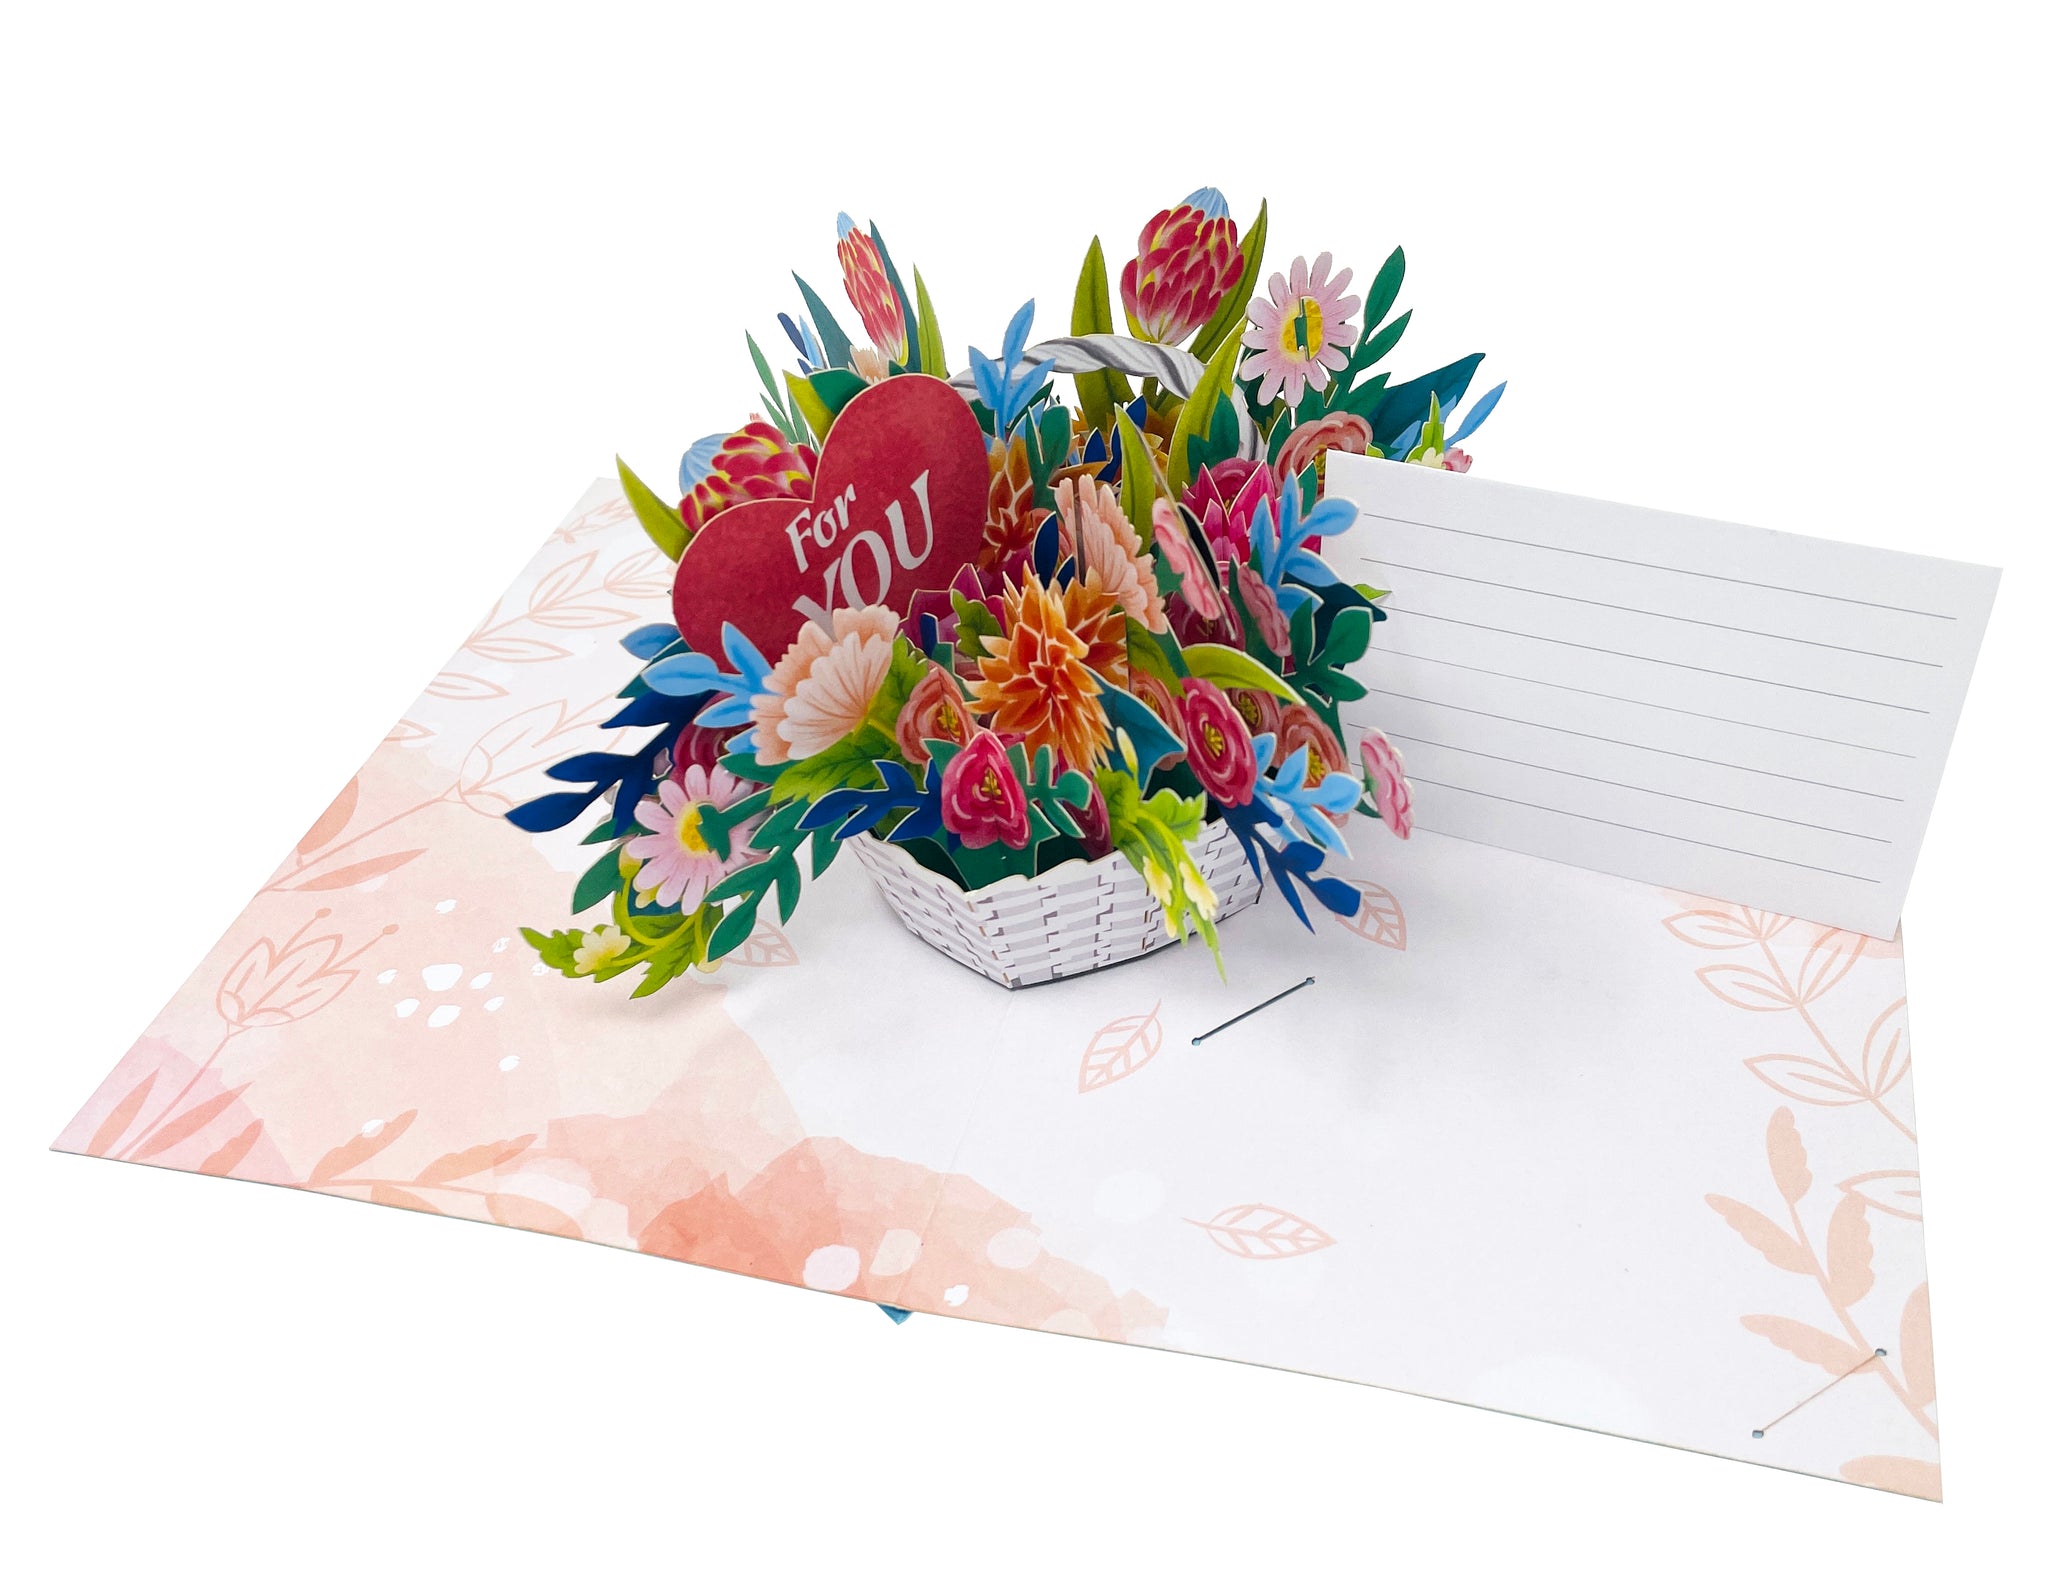 Flower Basket For - WOW 3D Pop Up Greeting Card – Pop Up Card